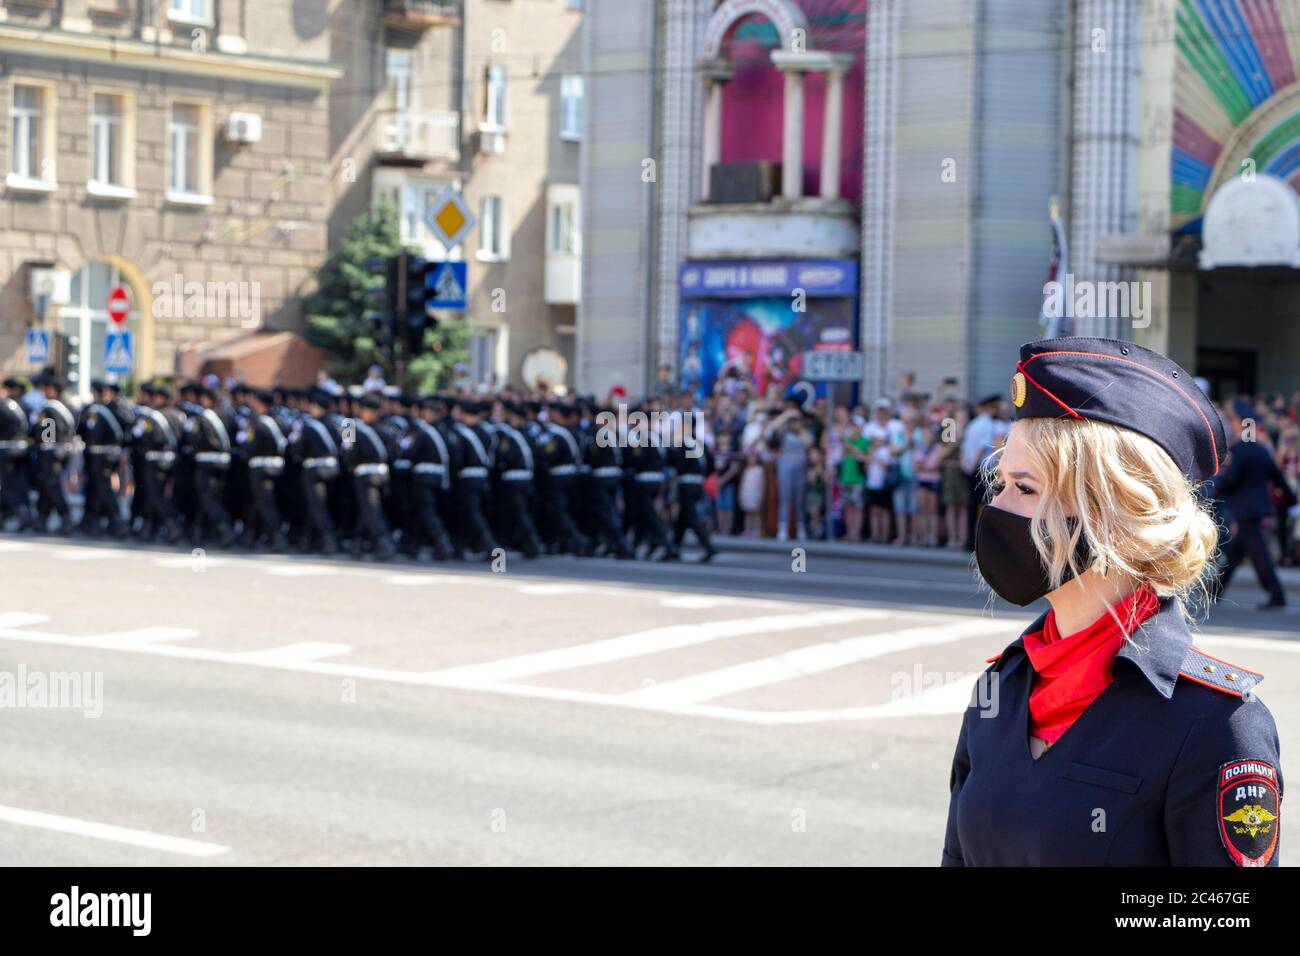 Donetsk, Donetsk People Republic - June 24, 2020: Policewoman in foreground in mask from coronavirus. Troops march along the main street of the city i Stock Photo